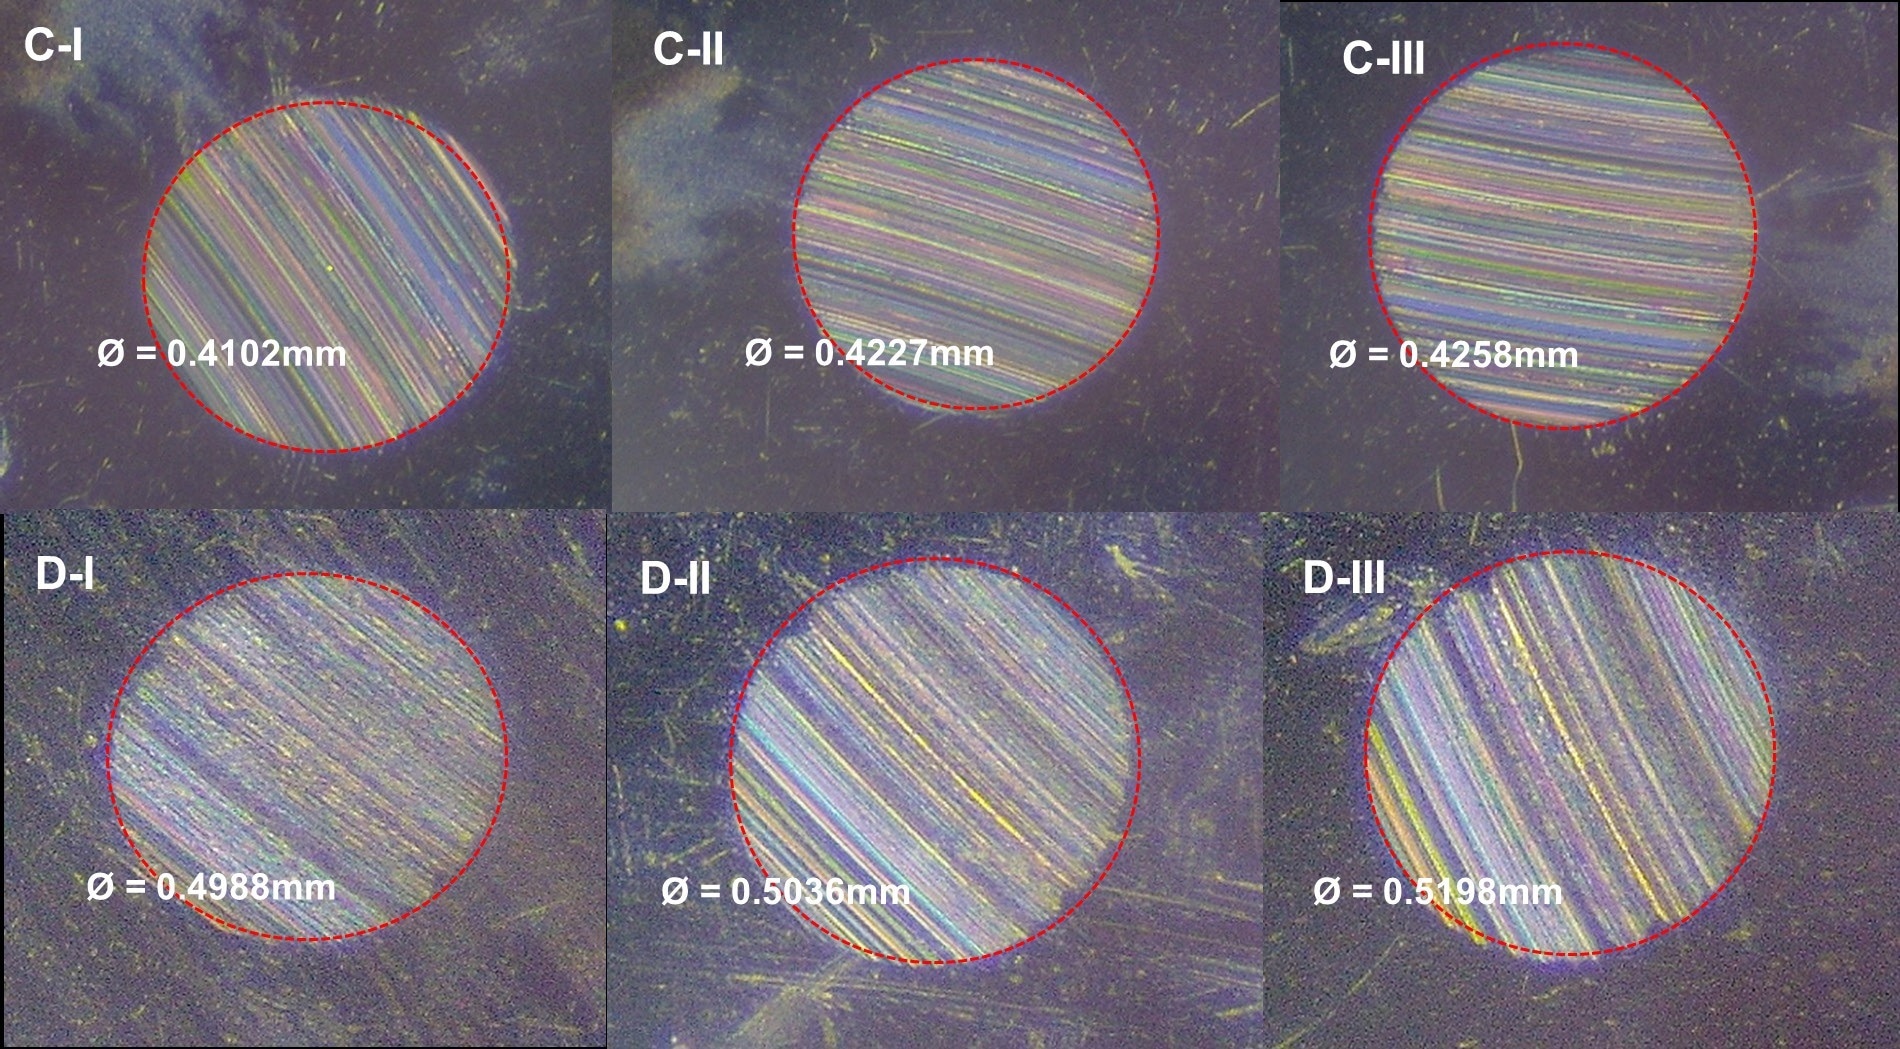 Optical micrographs of wear scars on each of the lower steel balls. The test with PU grease (C-I, C-II, and C-III) produced smaller scars compared to the test using POE grease (D-I, D-II, and D-III).